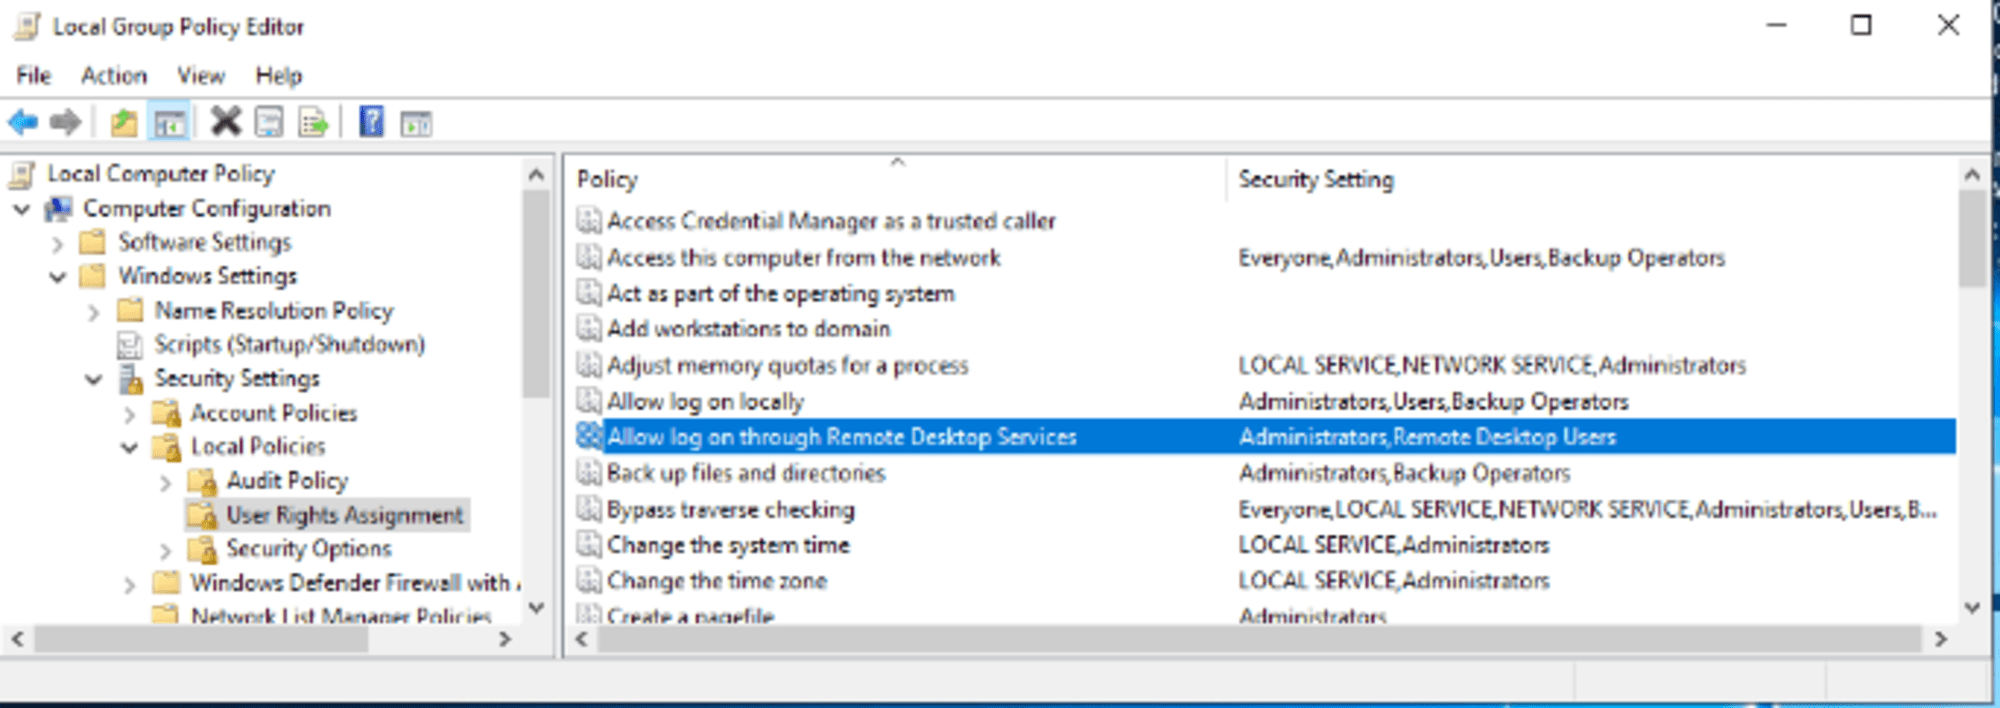 local_group_policy